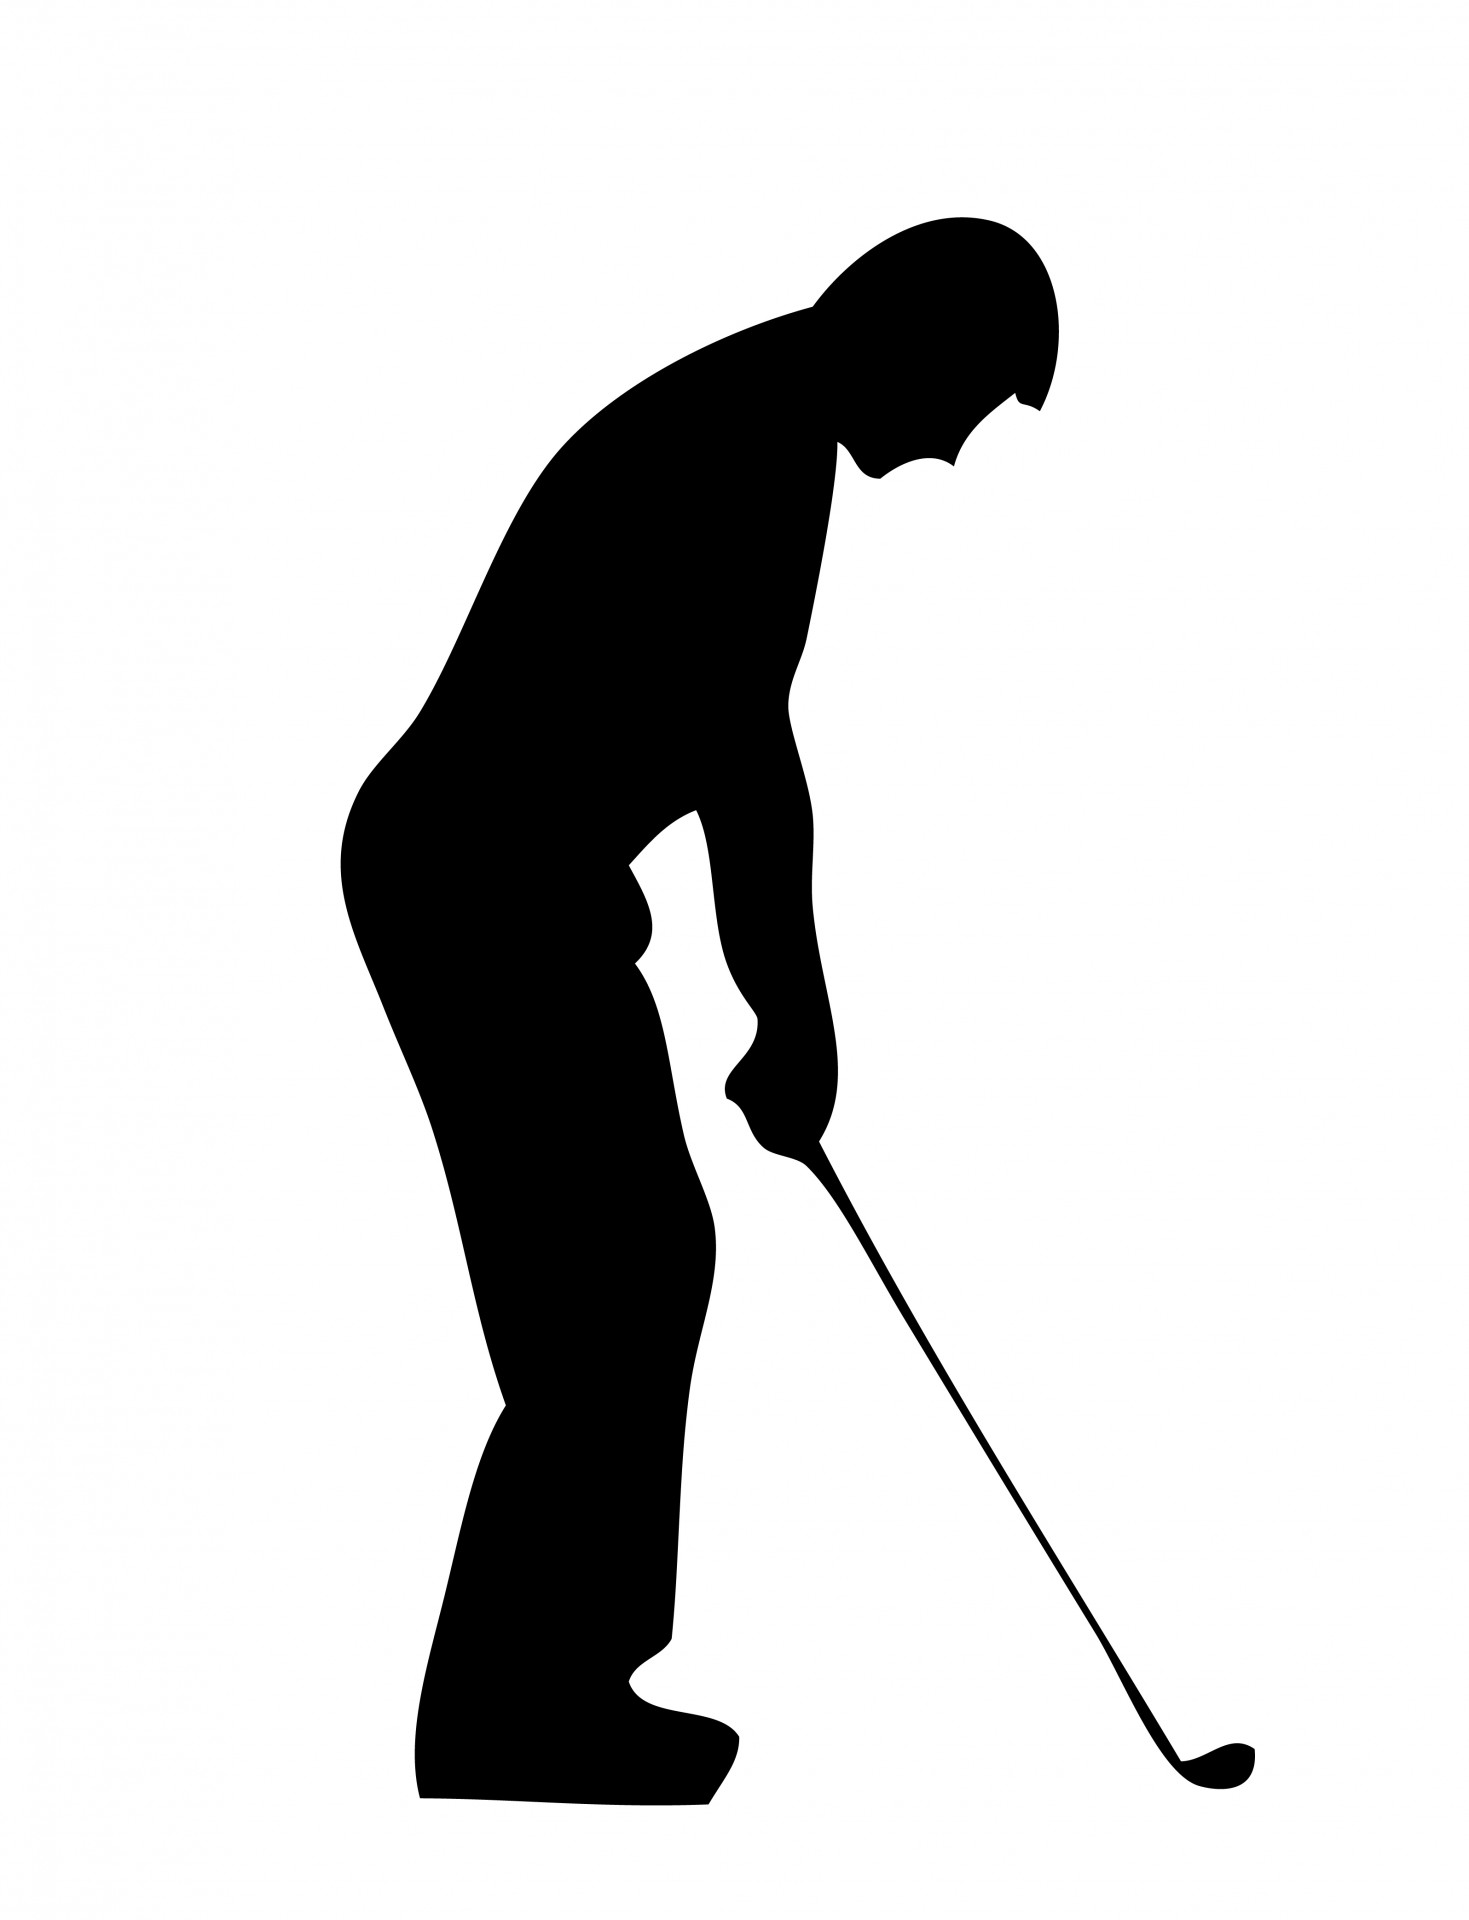 Golf Player Silhouette Image Png Clipart